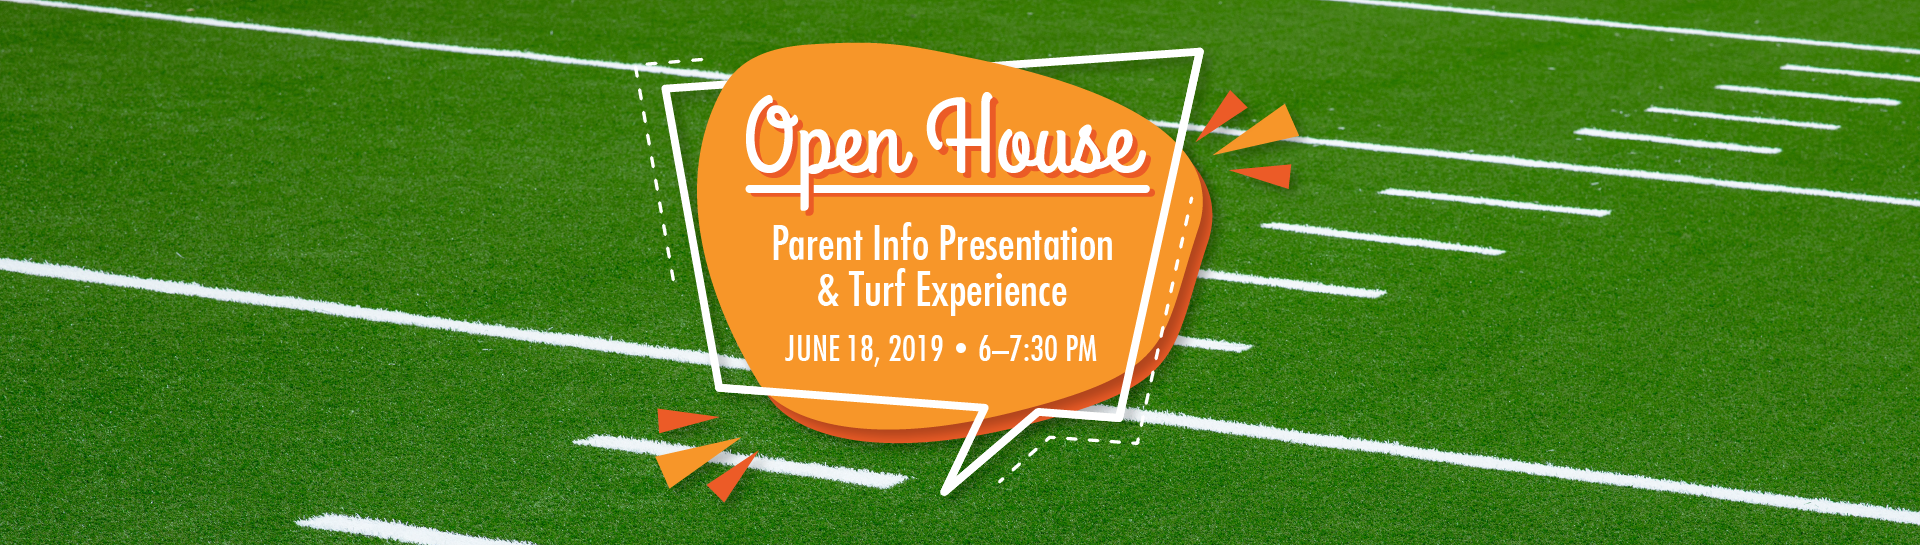 Open House Parent Info Presentation and Turf Experience - June 18